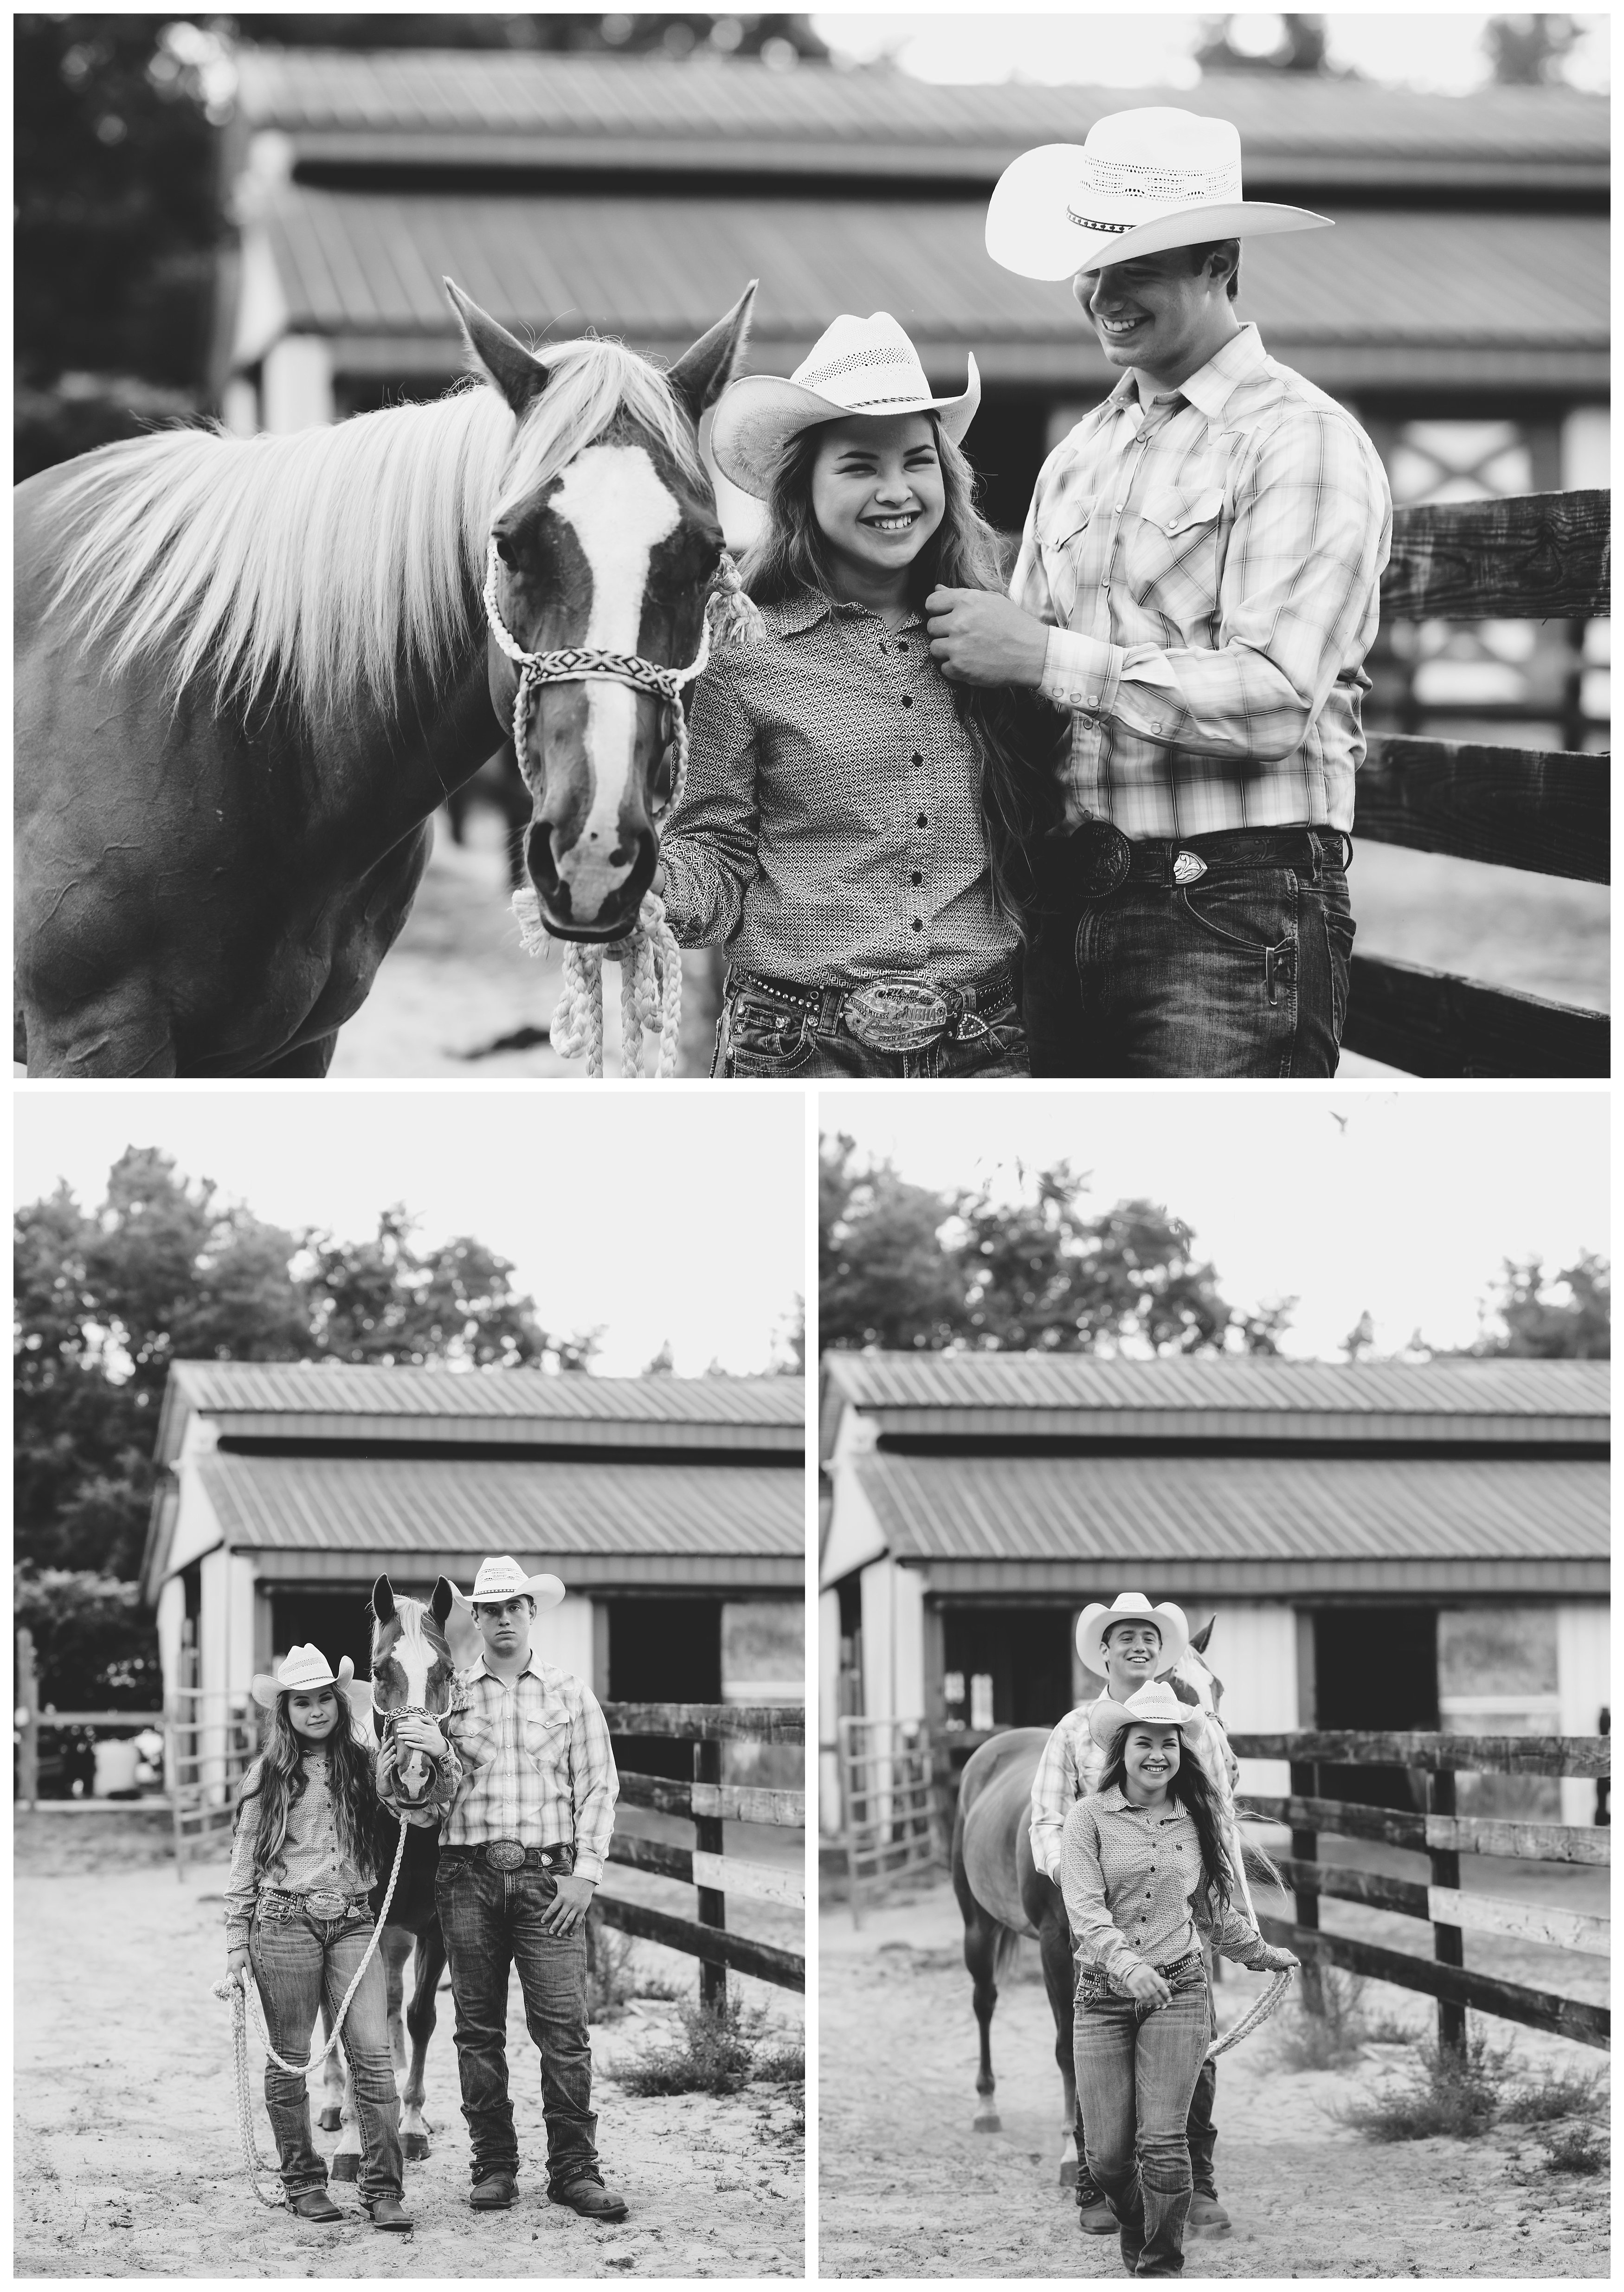 Western themed photo session with cowgirl and cowboy in Jacksonville, Fl.